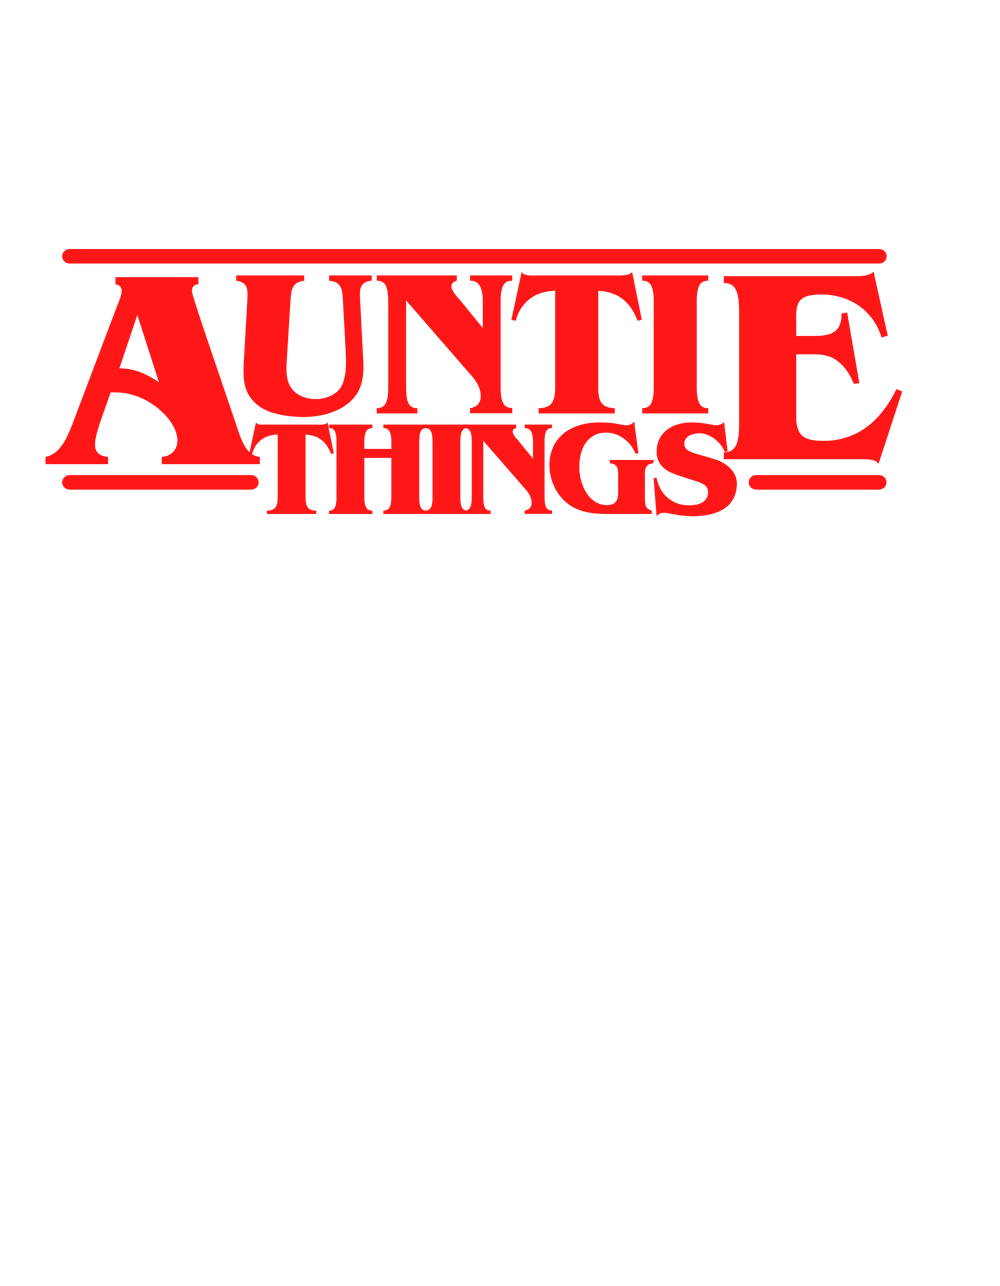 Auntie Things Tee 91342707381494152555 24 T-Shirt Worlds Worst Tees